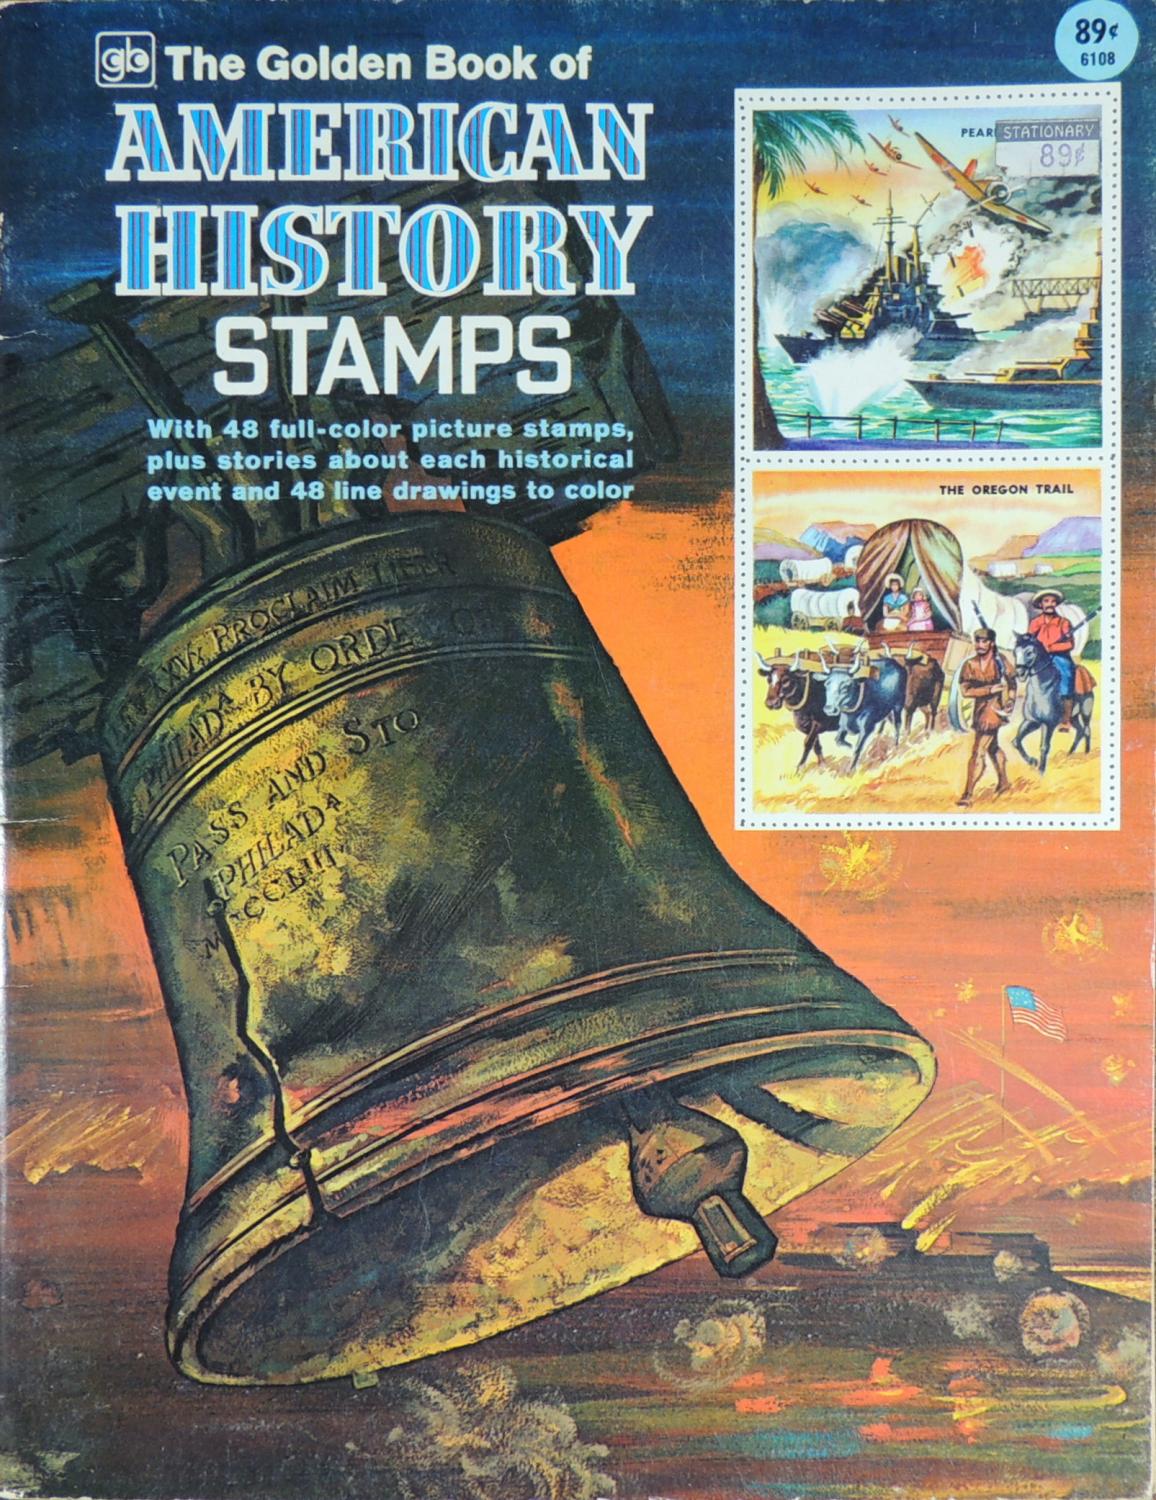 The Golden Book of American History Stamps